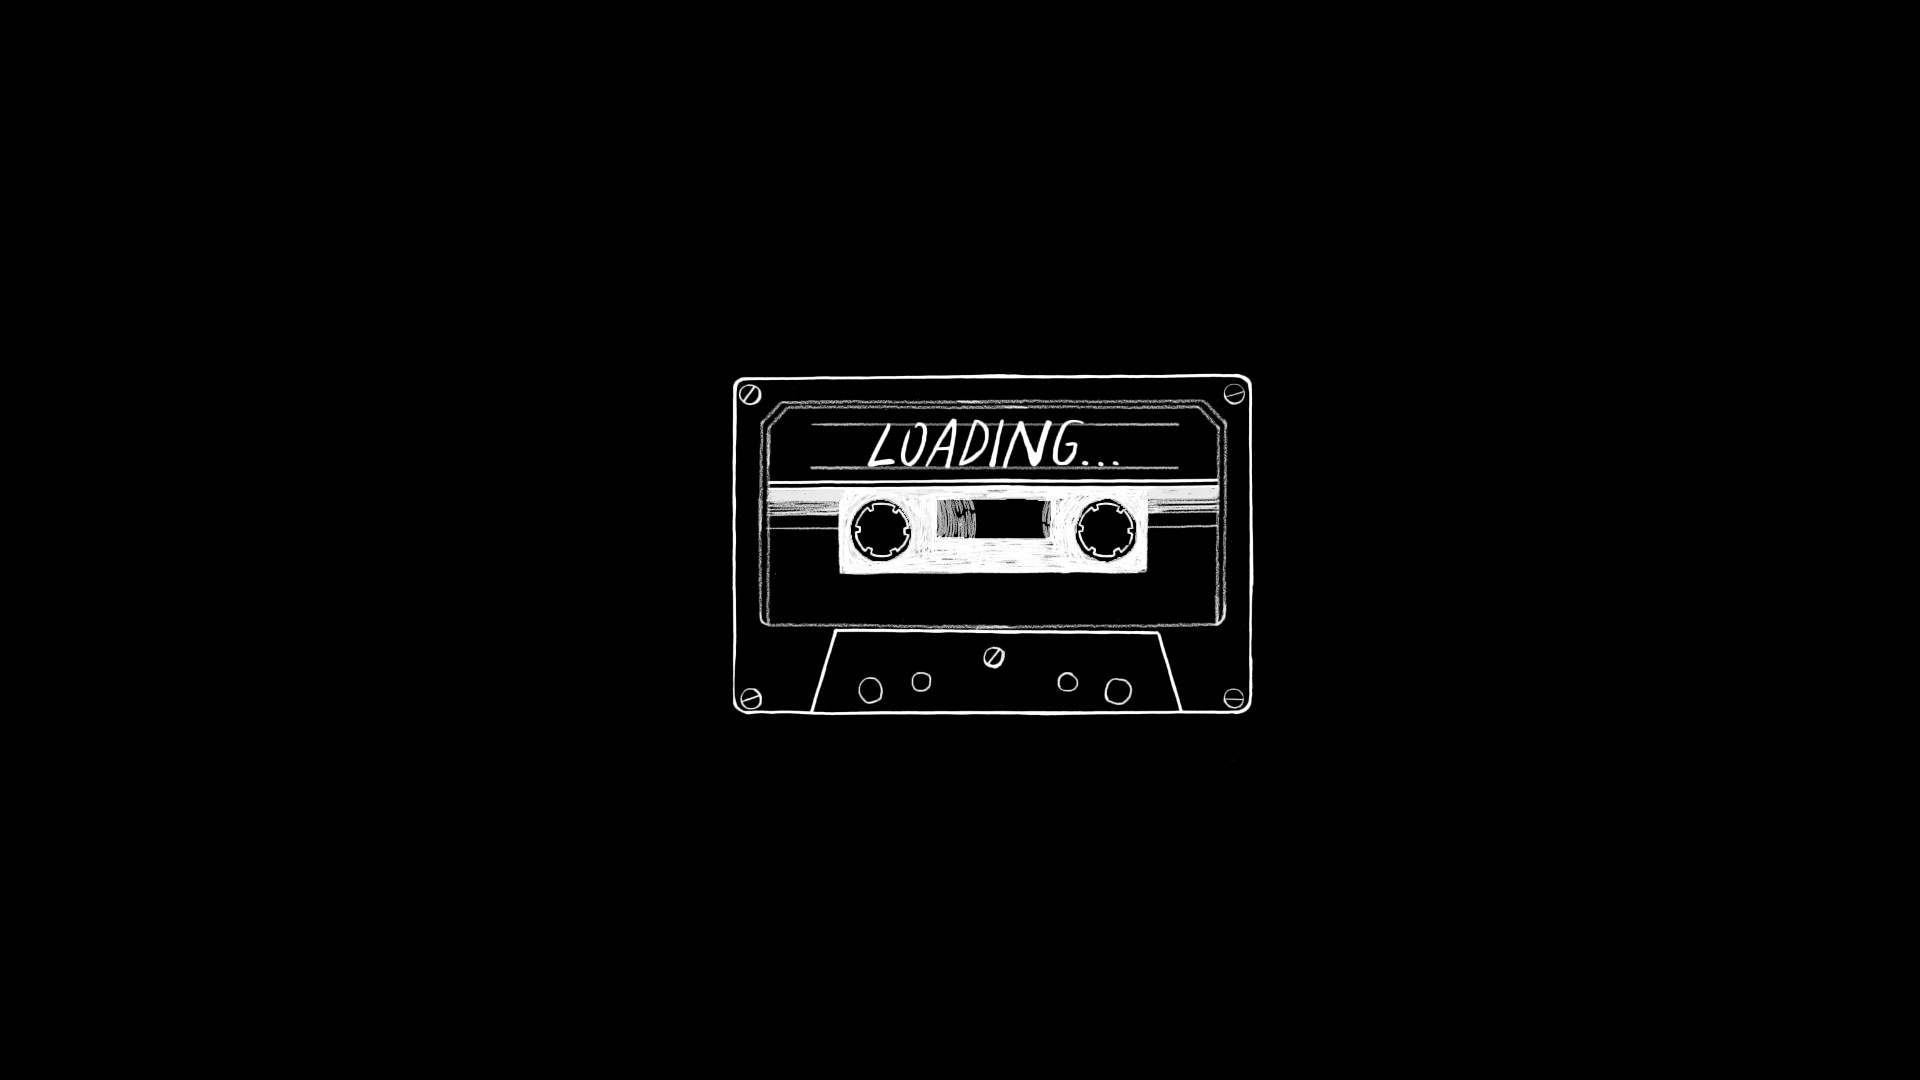 General 1920x1080 minimalism simple background black background music cassette monochrome Gone Home Loading screen loading